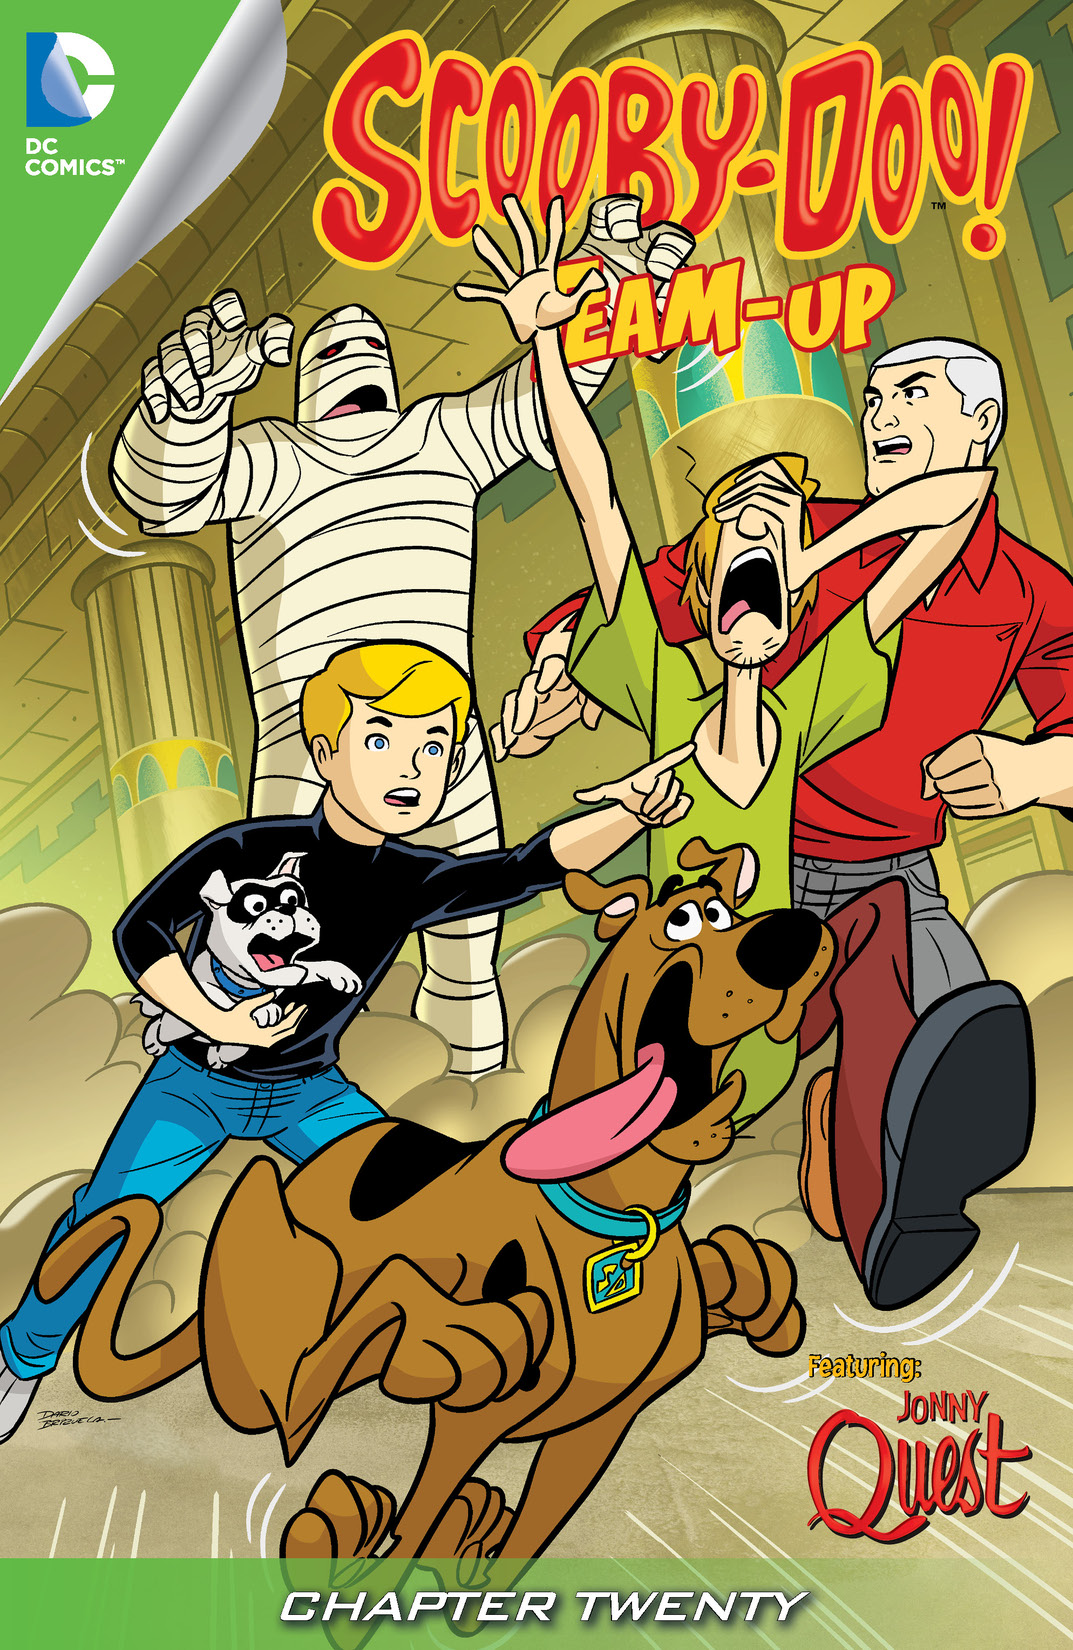 Scooby-Doo Team-Up #20 preview images